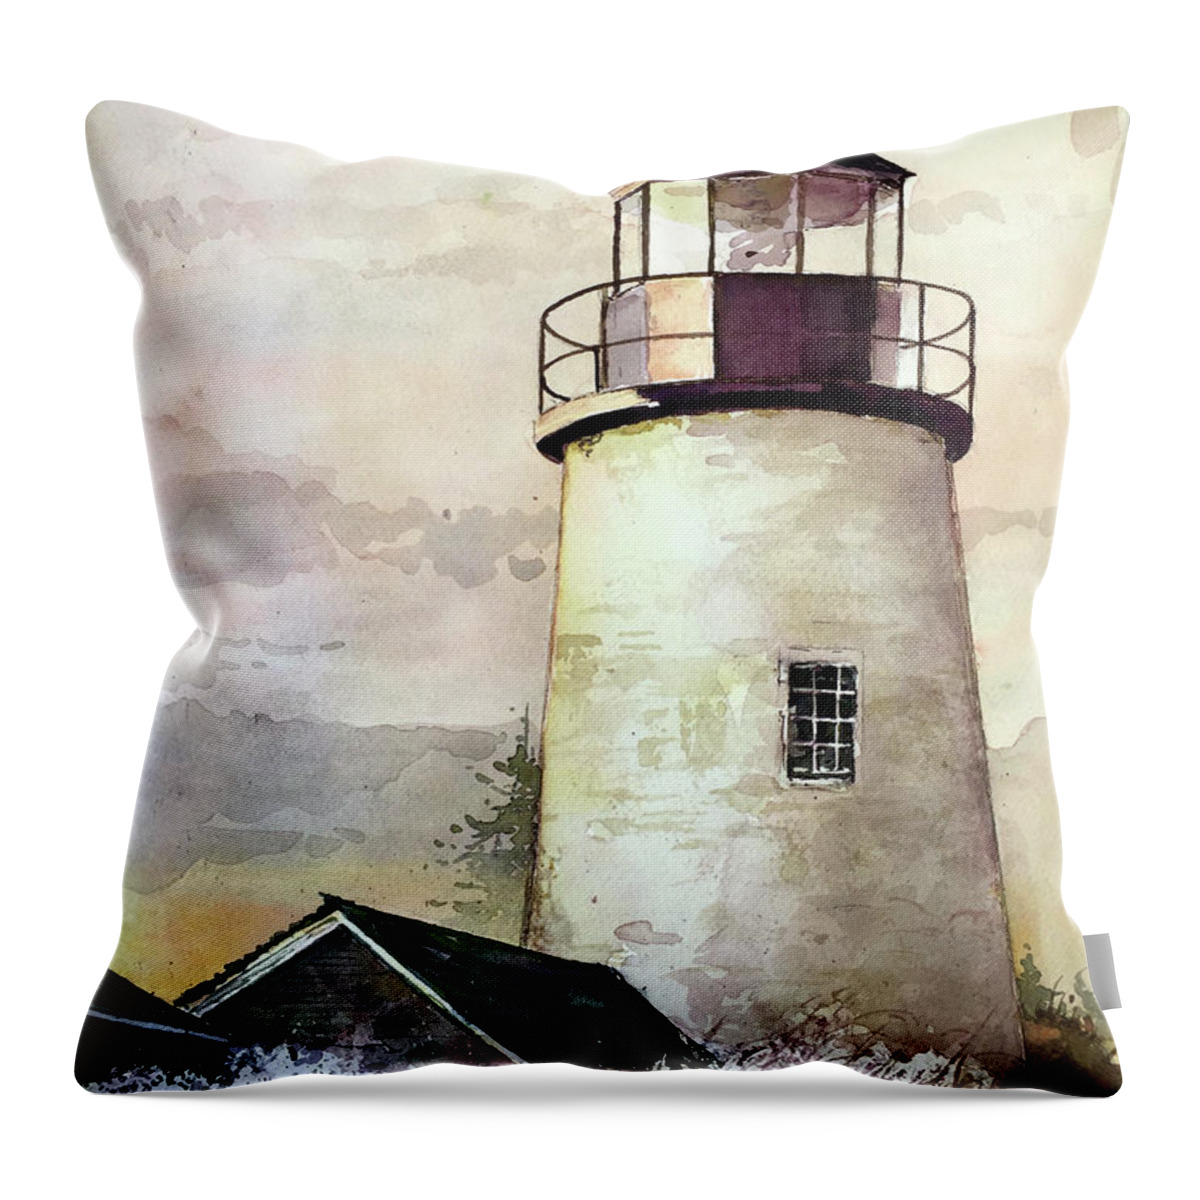 Sunset At The Pemaquid Point Lighthouse In Maine. Throw Pillow featuring the painting Evening At The Light by Monte Toon